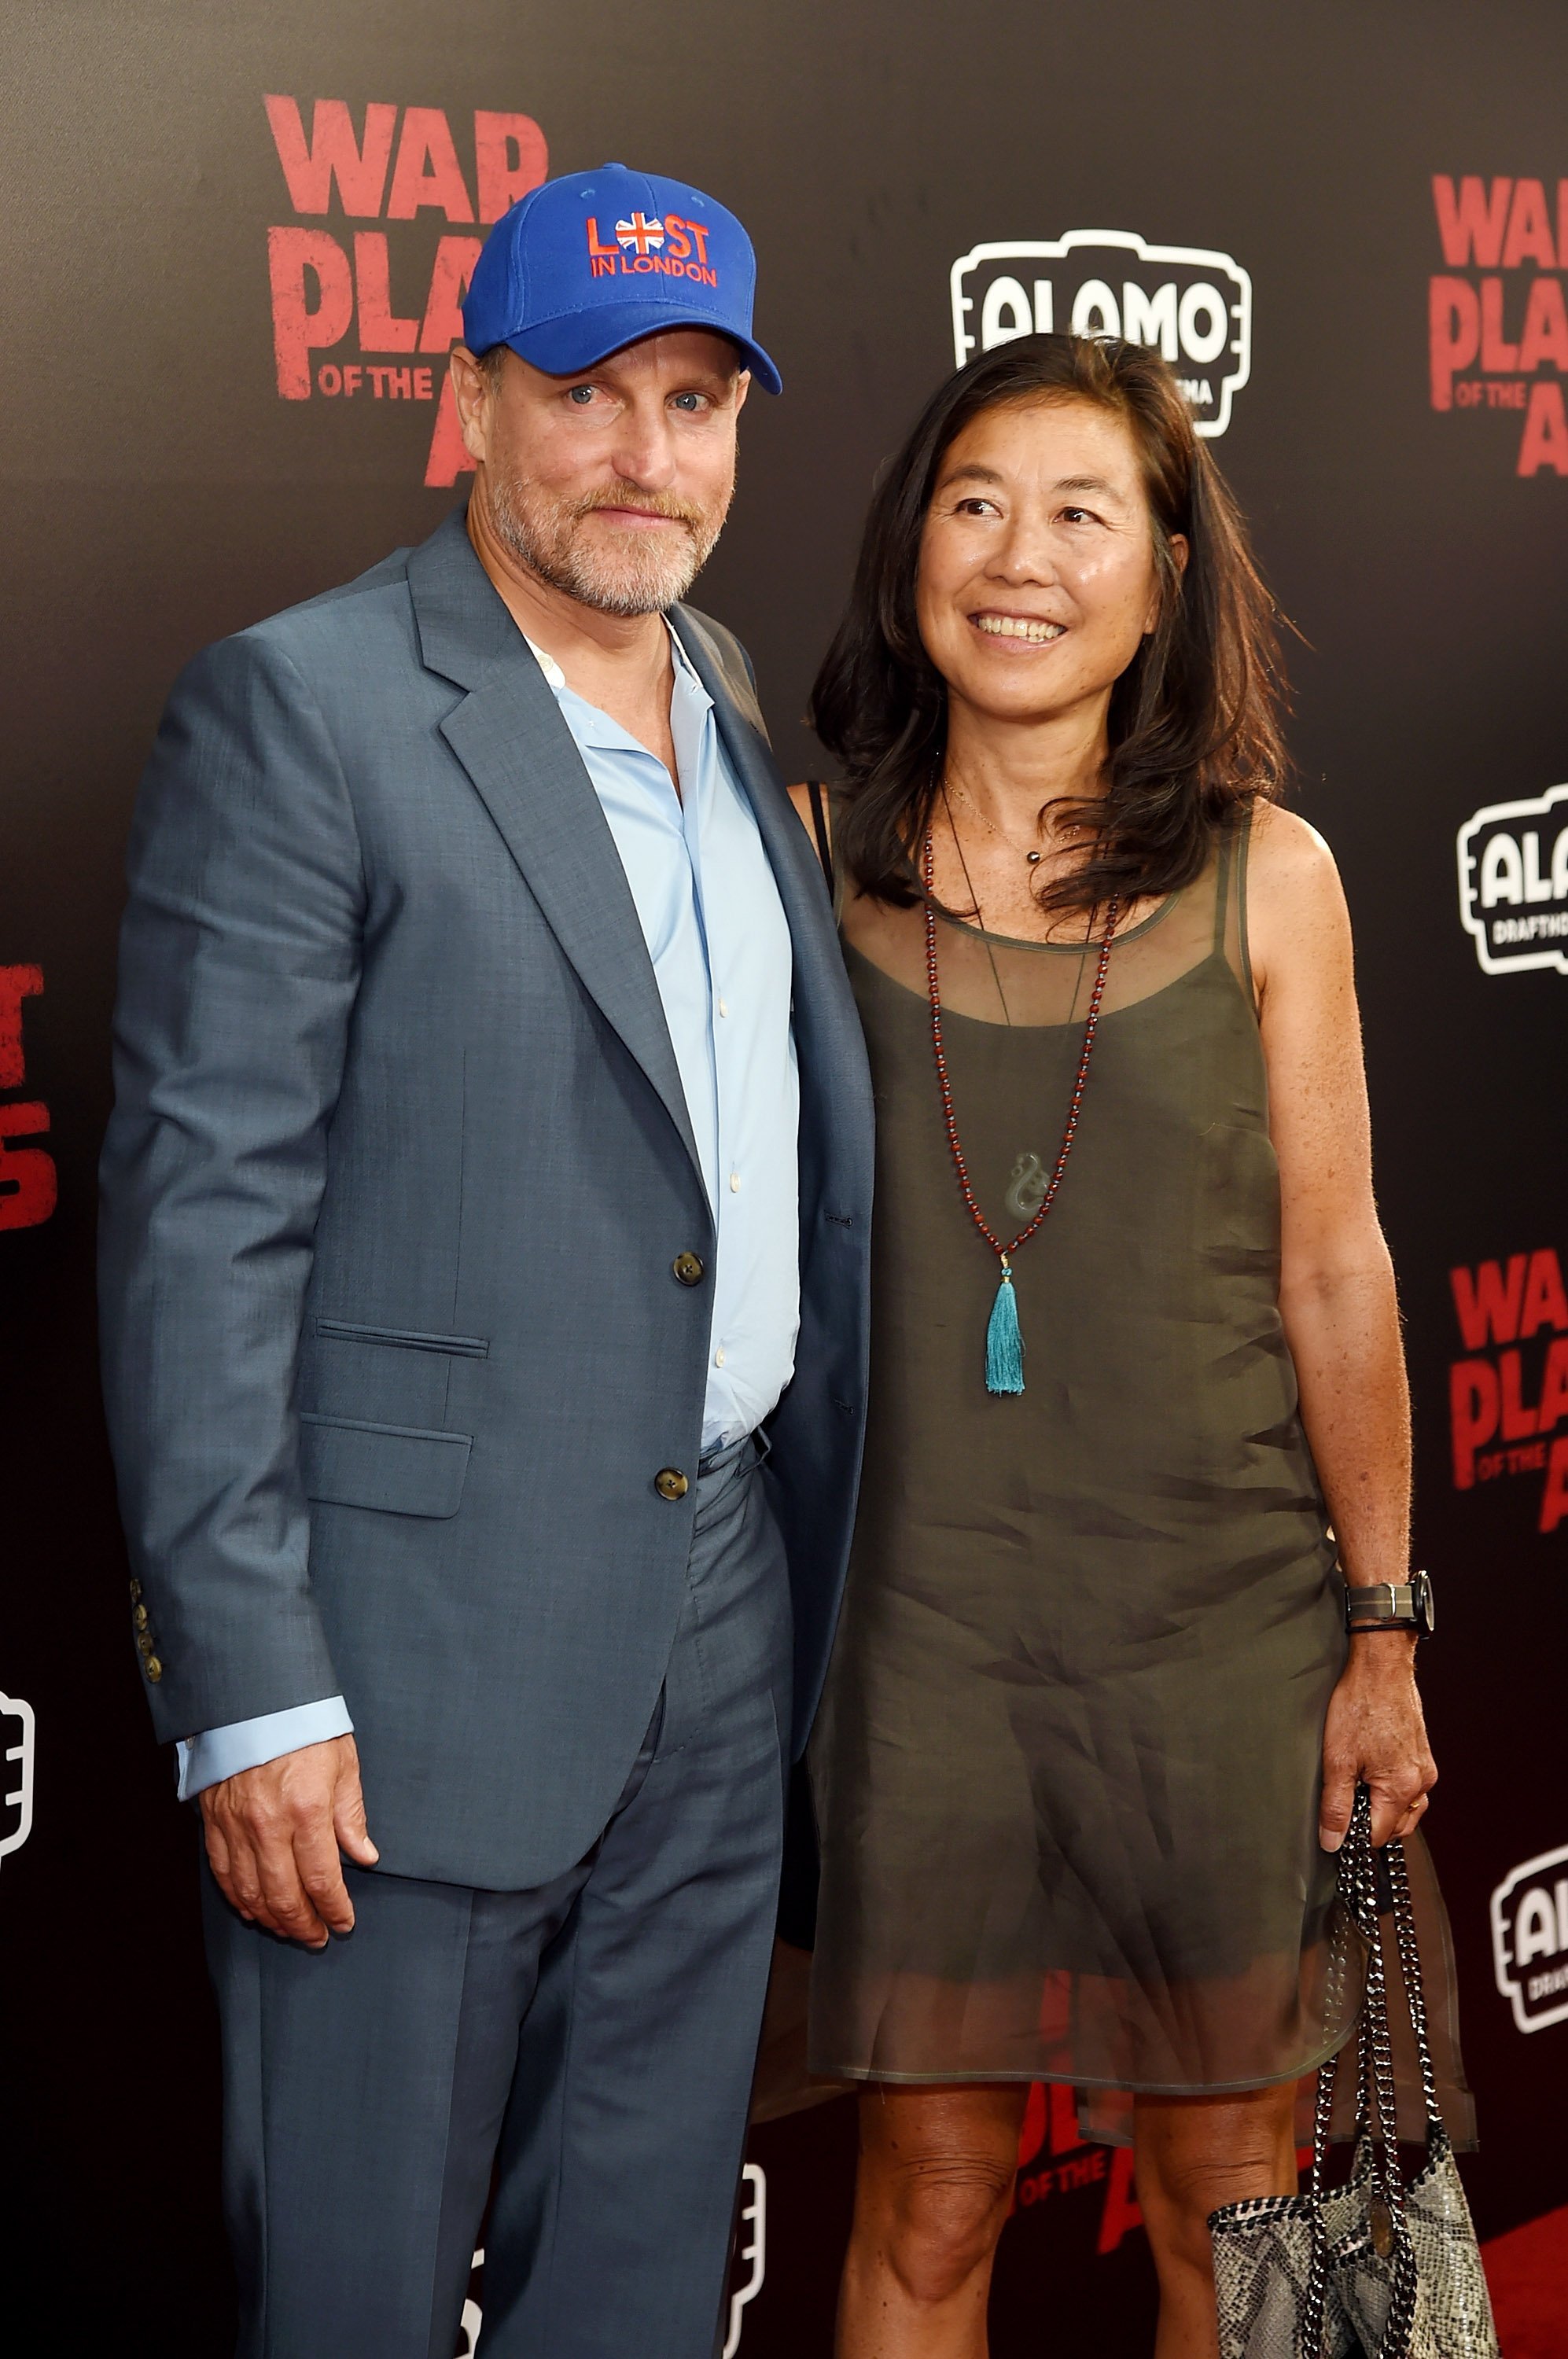 Woody Harrelson and Laura Louie attend "War for the Planet Of The Apes" premiere at SVA Theater on July 10, 2017, in New York City. | Source: Getty Images.